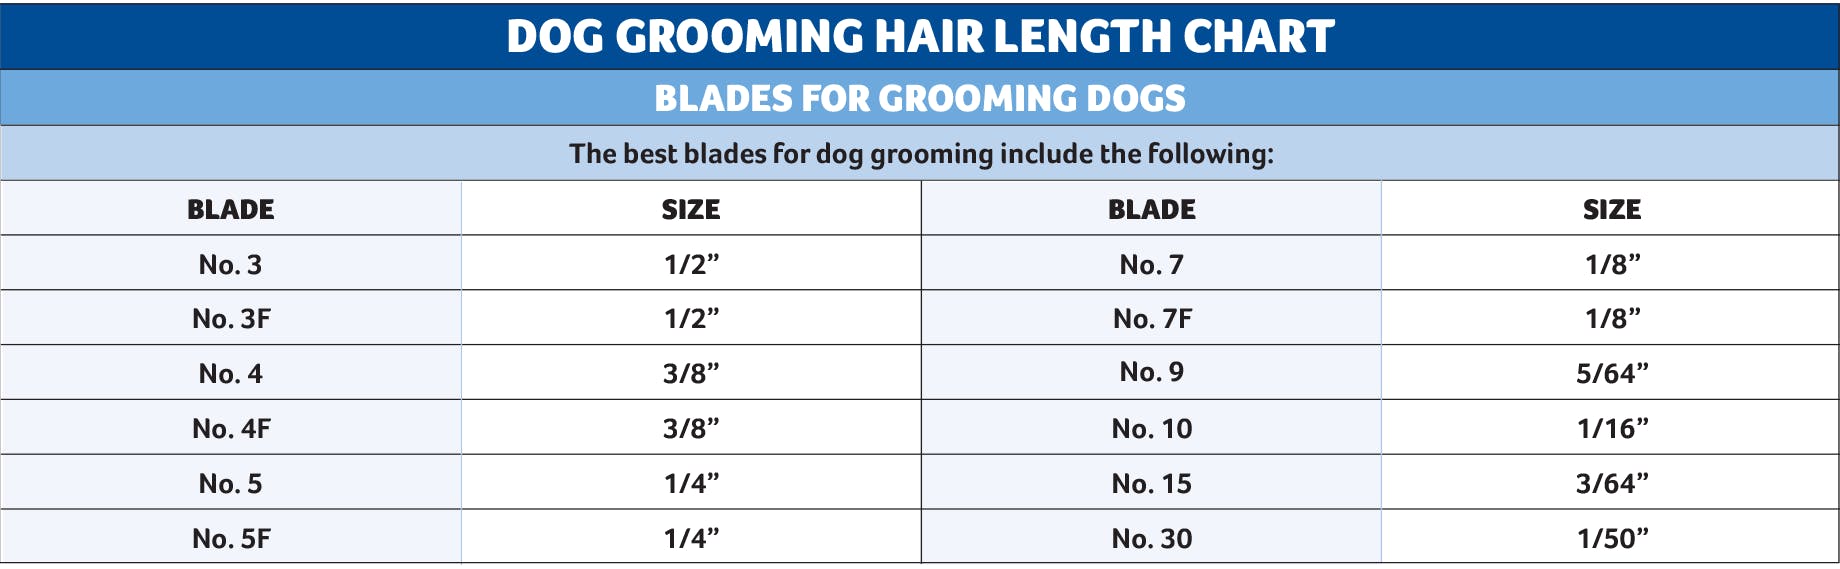 Pet Grooming Clipper Blade Chart Size and Use | Dog Grooming Clipper Blades